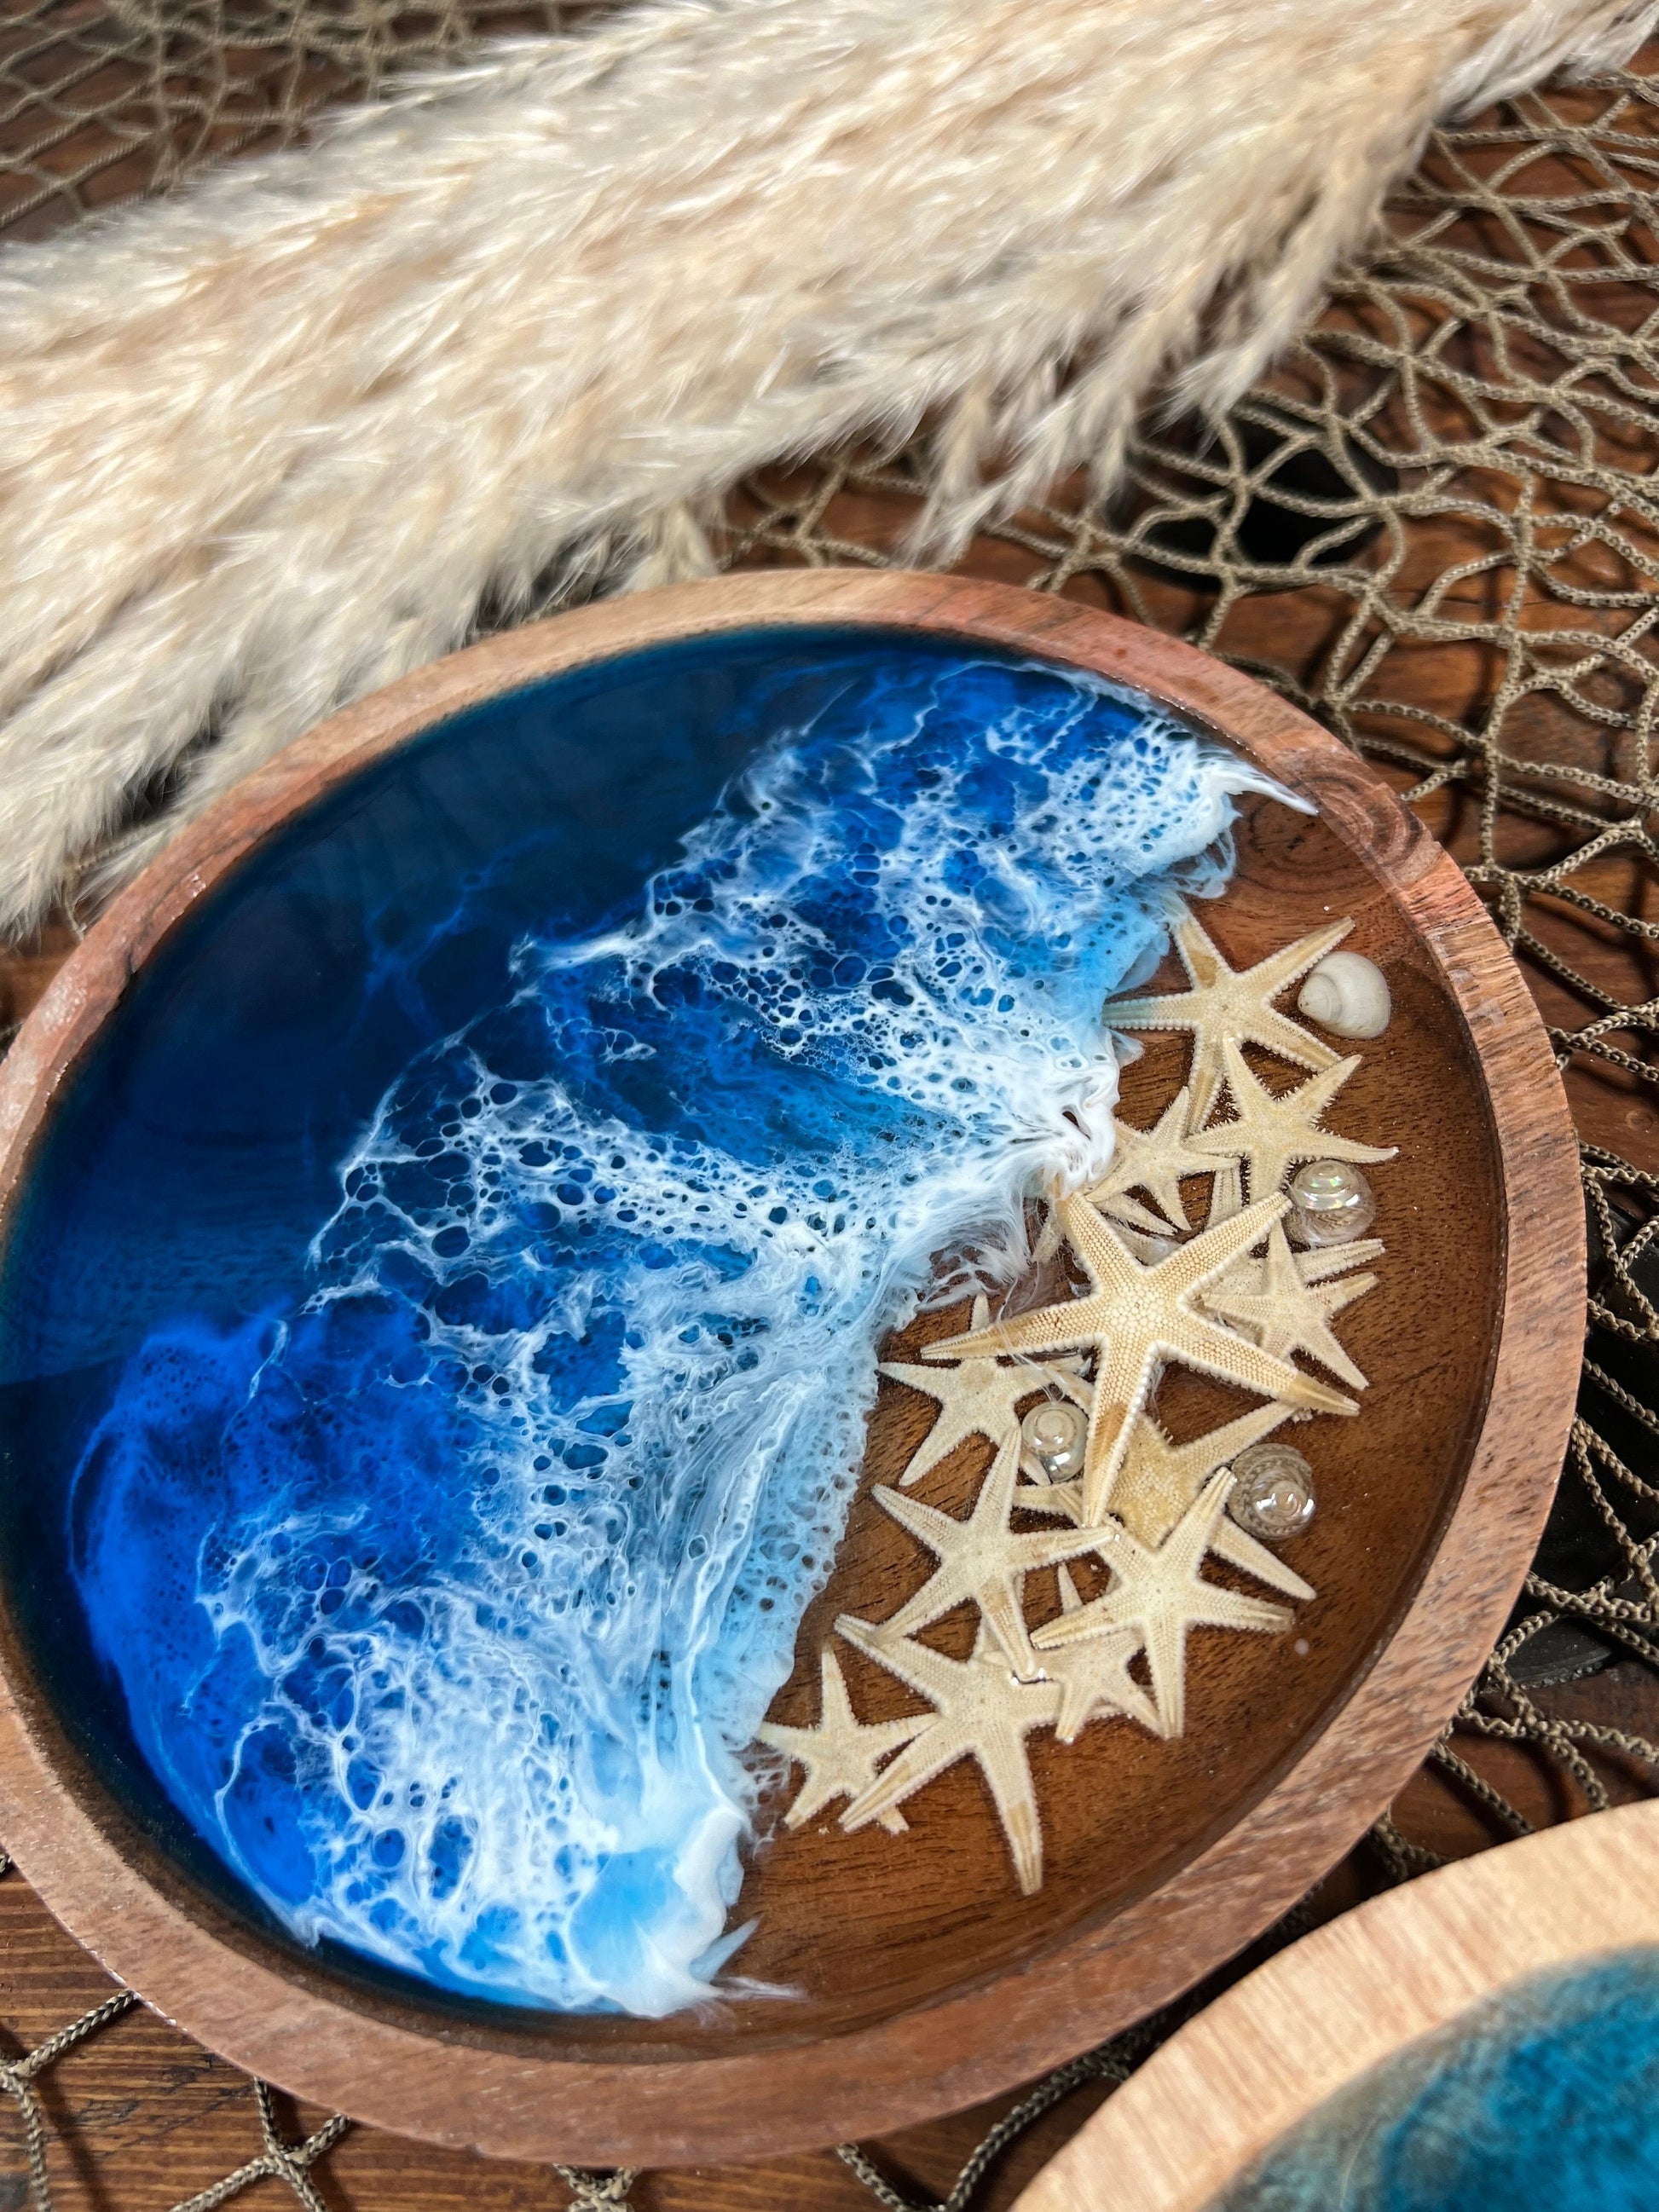 Ocean waves wooden plate, trinket or jewelry catch all